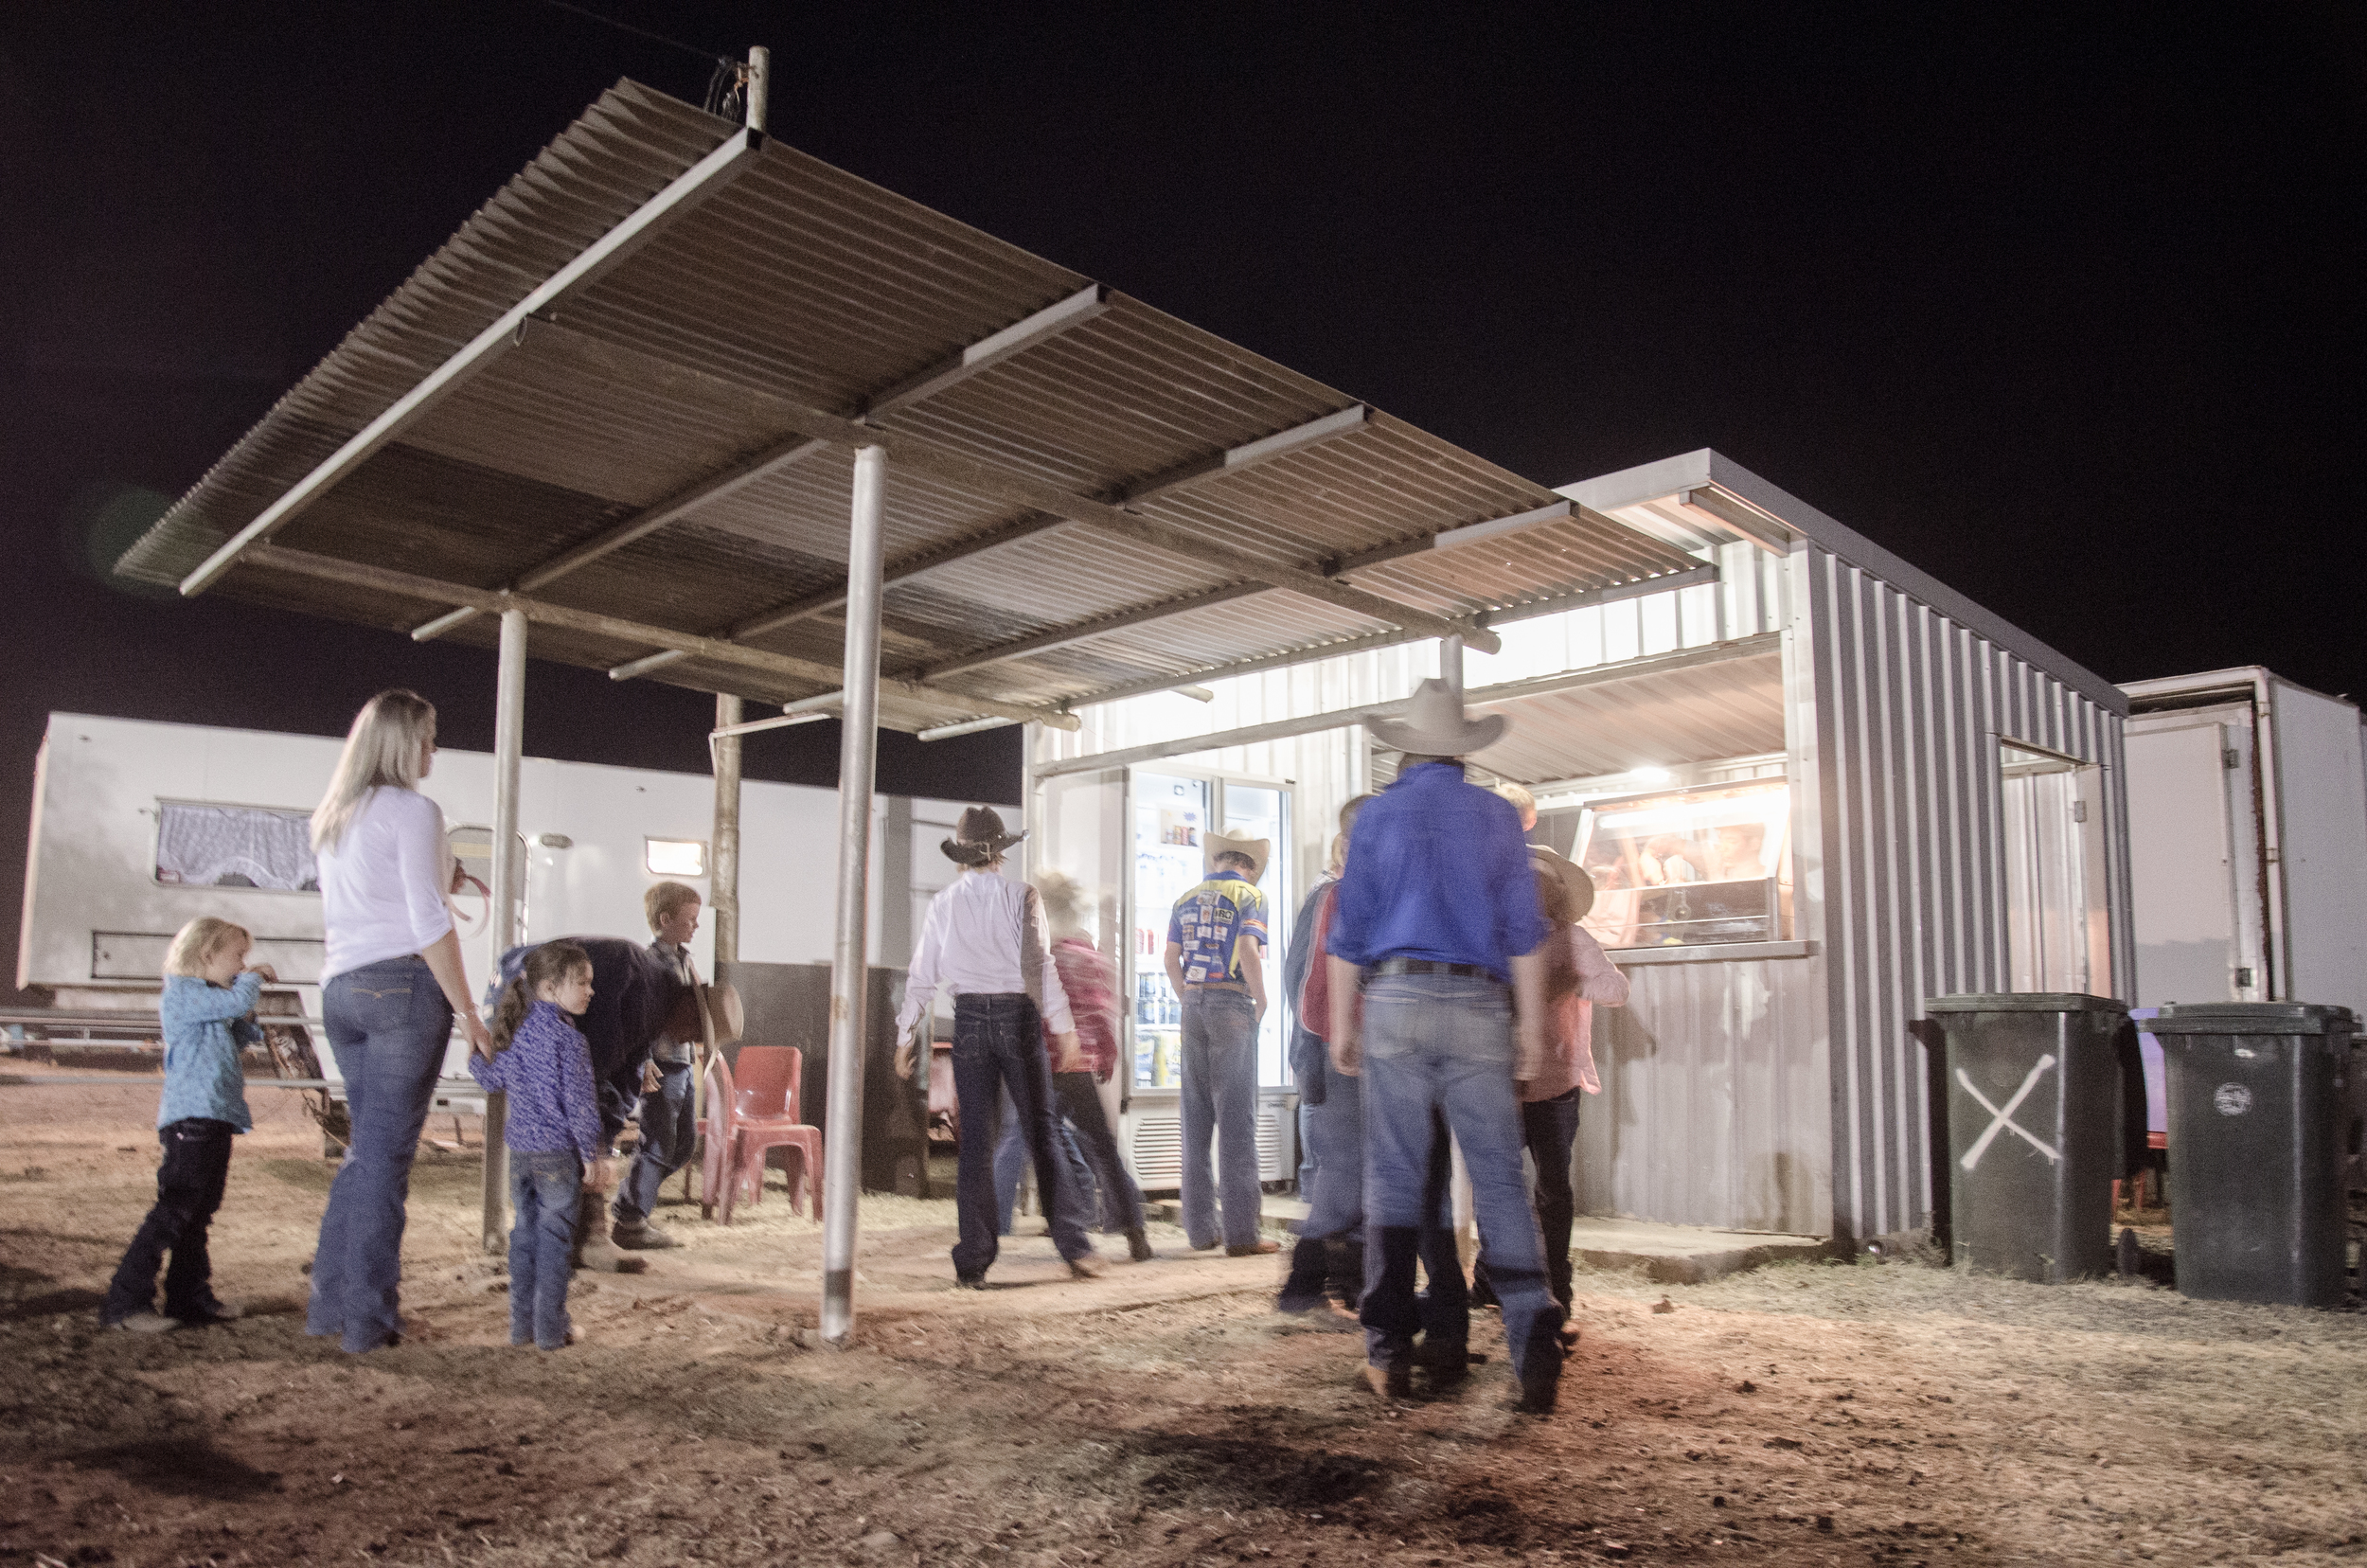  People get in line for a bite to eat before the night campdraft rodeo competition in the Australian heartland. 